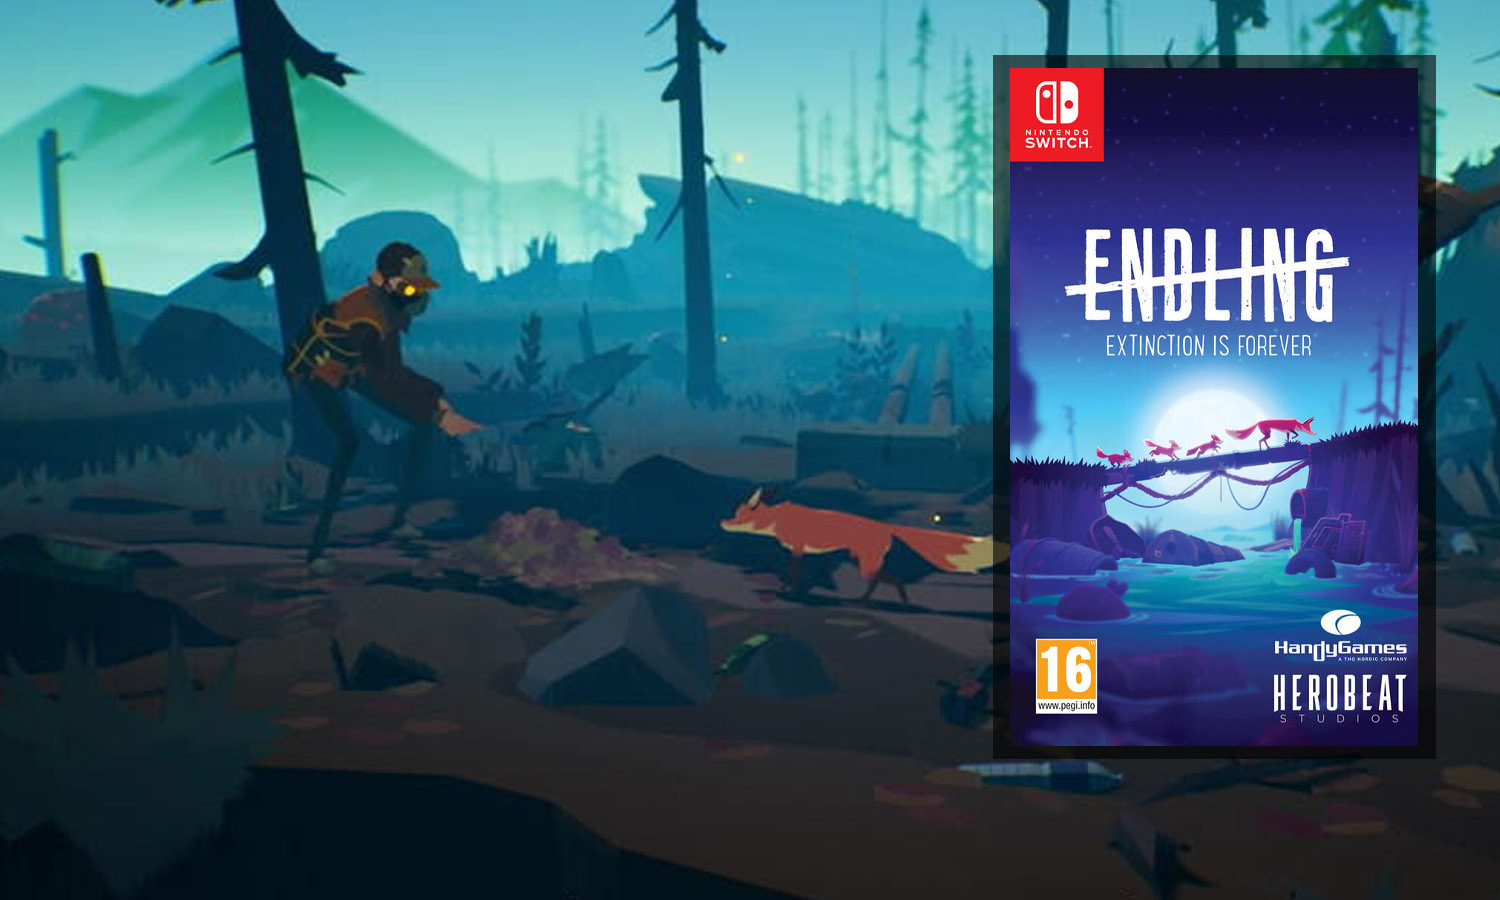 endling extinction is forever nintendo switch download